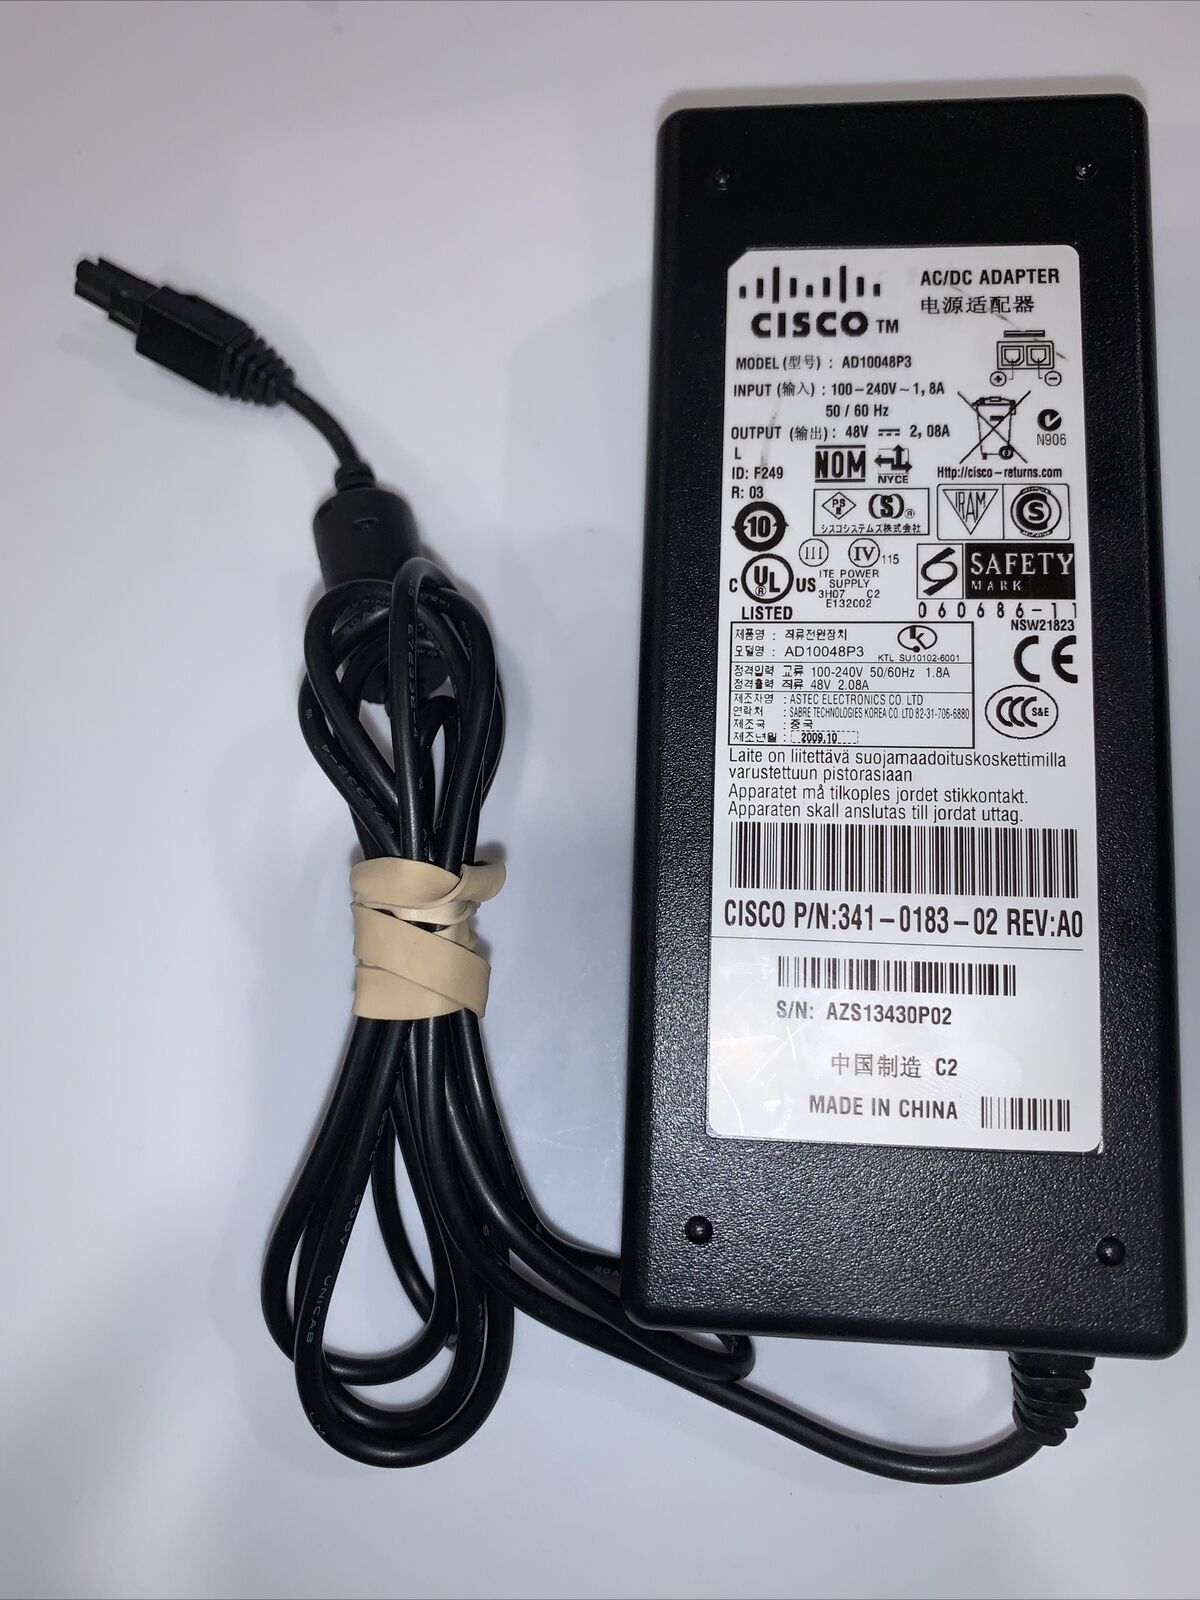 OEM CISCO 48V 2.08A 2-PIN POWER SUPPLY ADAPTER 341-0183-02 AD10048P3 TESTED-WORK Connectors: 2 Pin Compatible Brand: - Click Image to Close